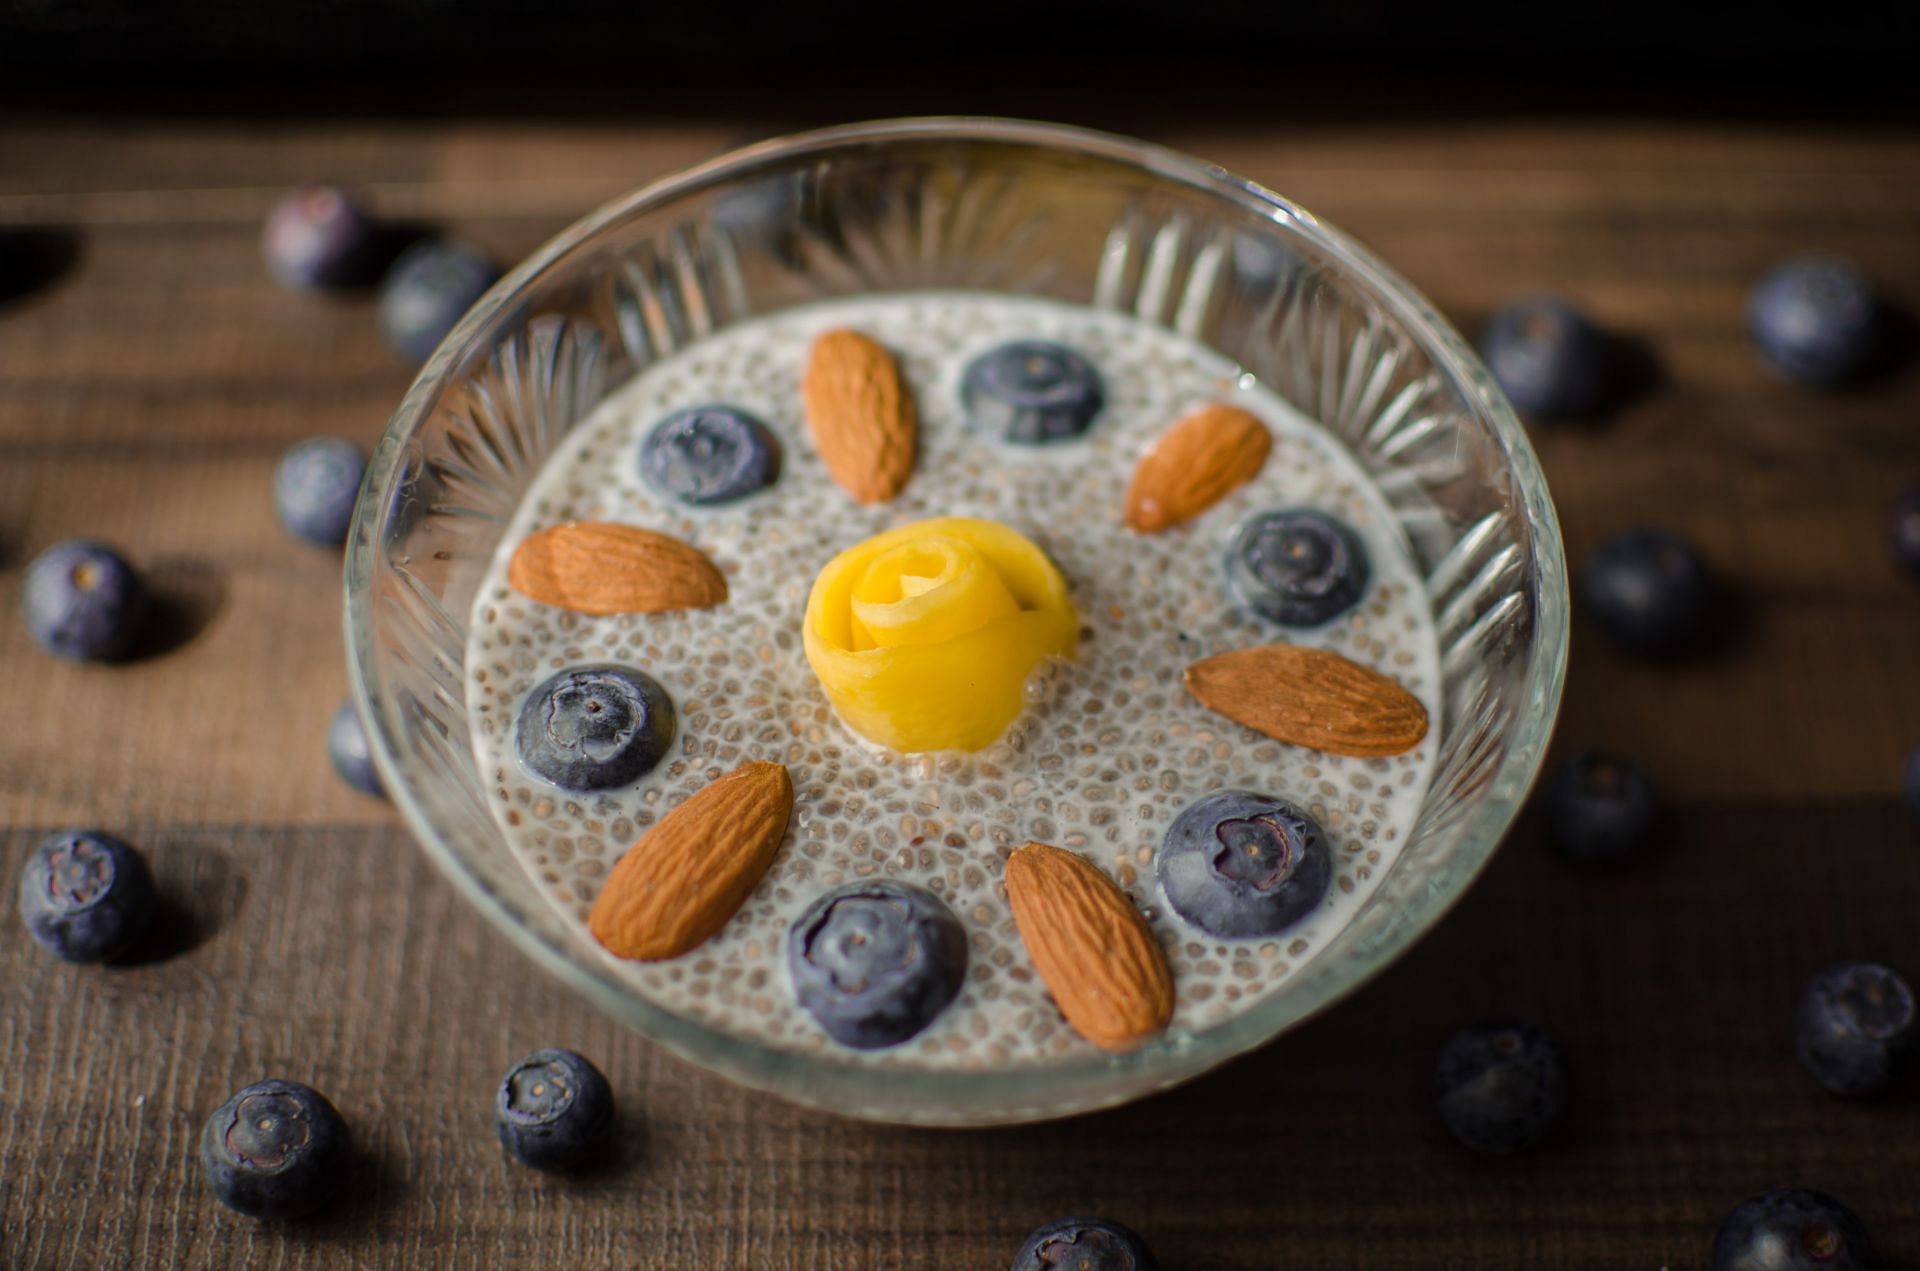 How effective are chia seeds for weight loss? (Image via Unsplash/Ad&eacute;l Grőber)